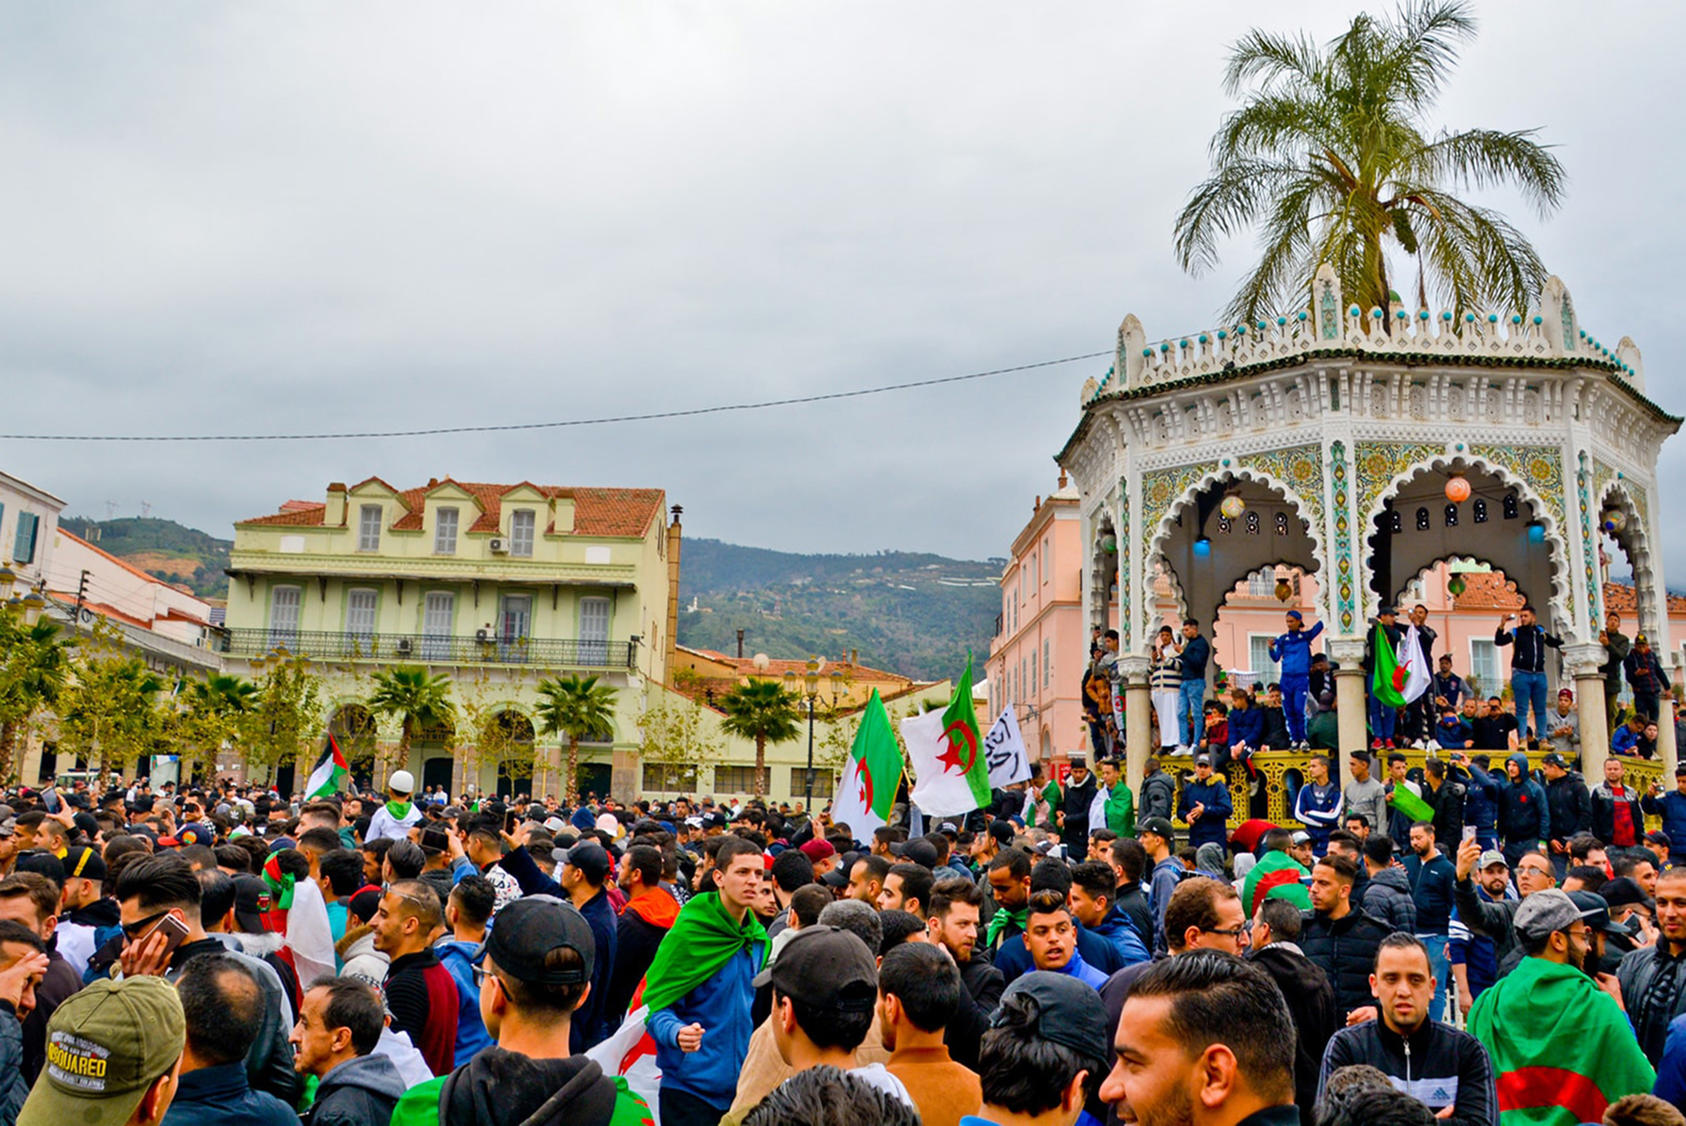 Protesters assemble in opposition to President Bouteflika’s fifth term in Blida, Algeria, March 10, 2019. (Fethi Hamlati/Wikimedia)